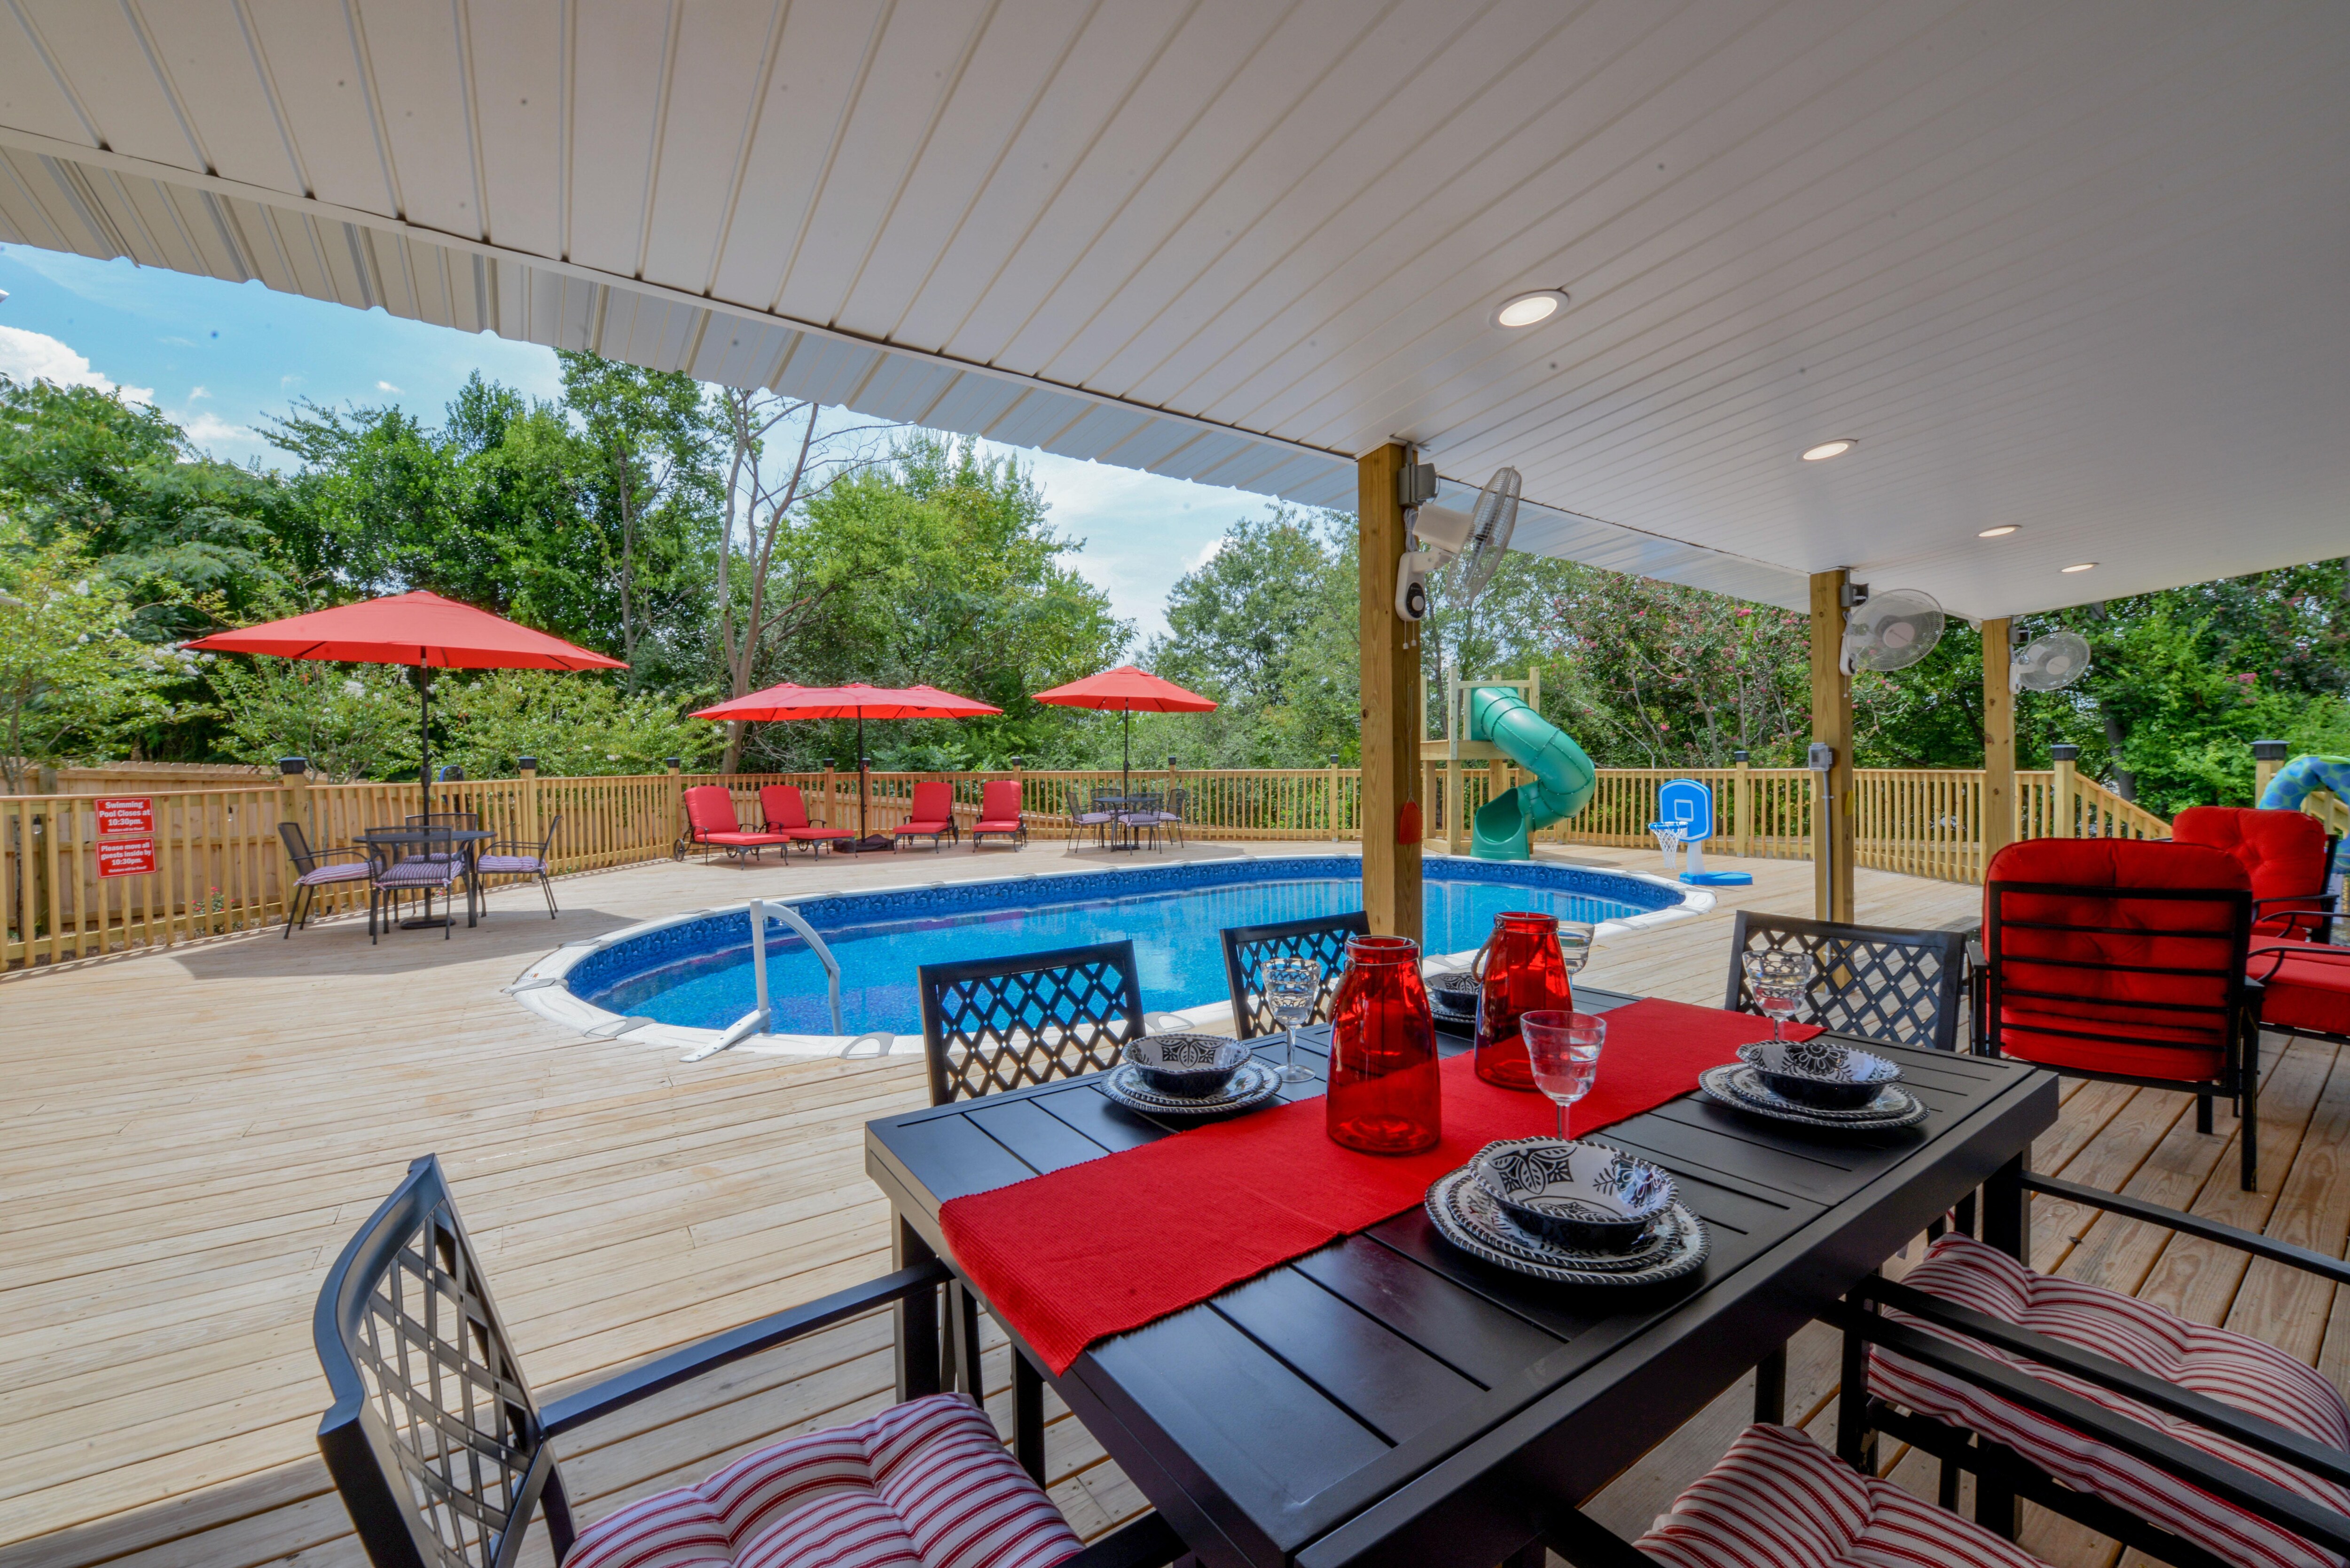 There is plenty to do at Bama Cottage! Out in the back there is a pool and water slide. There's also sun lounging chairs and a covered area for dining and grilling out.